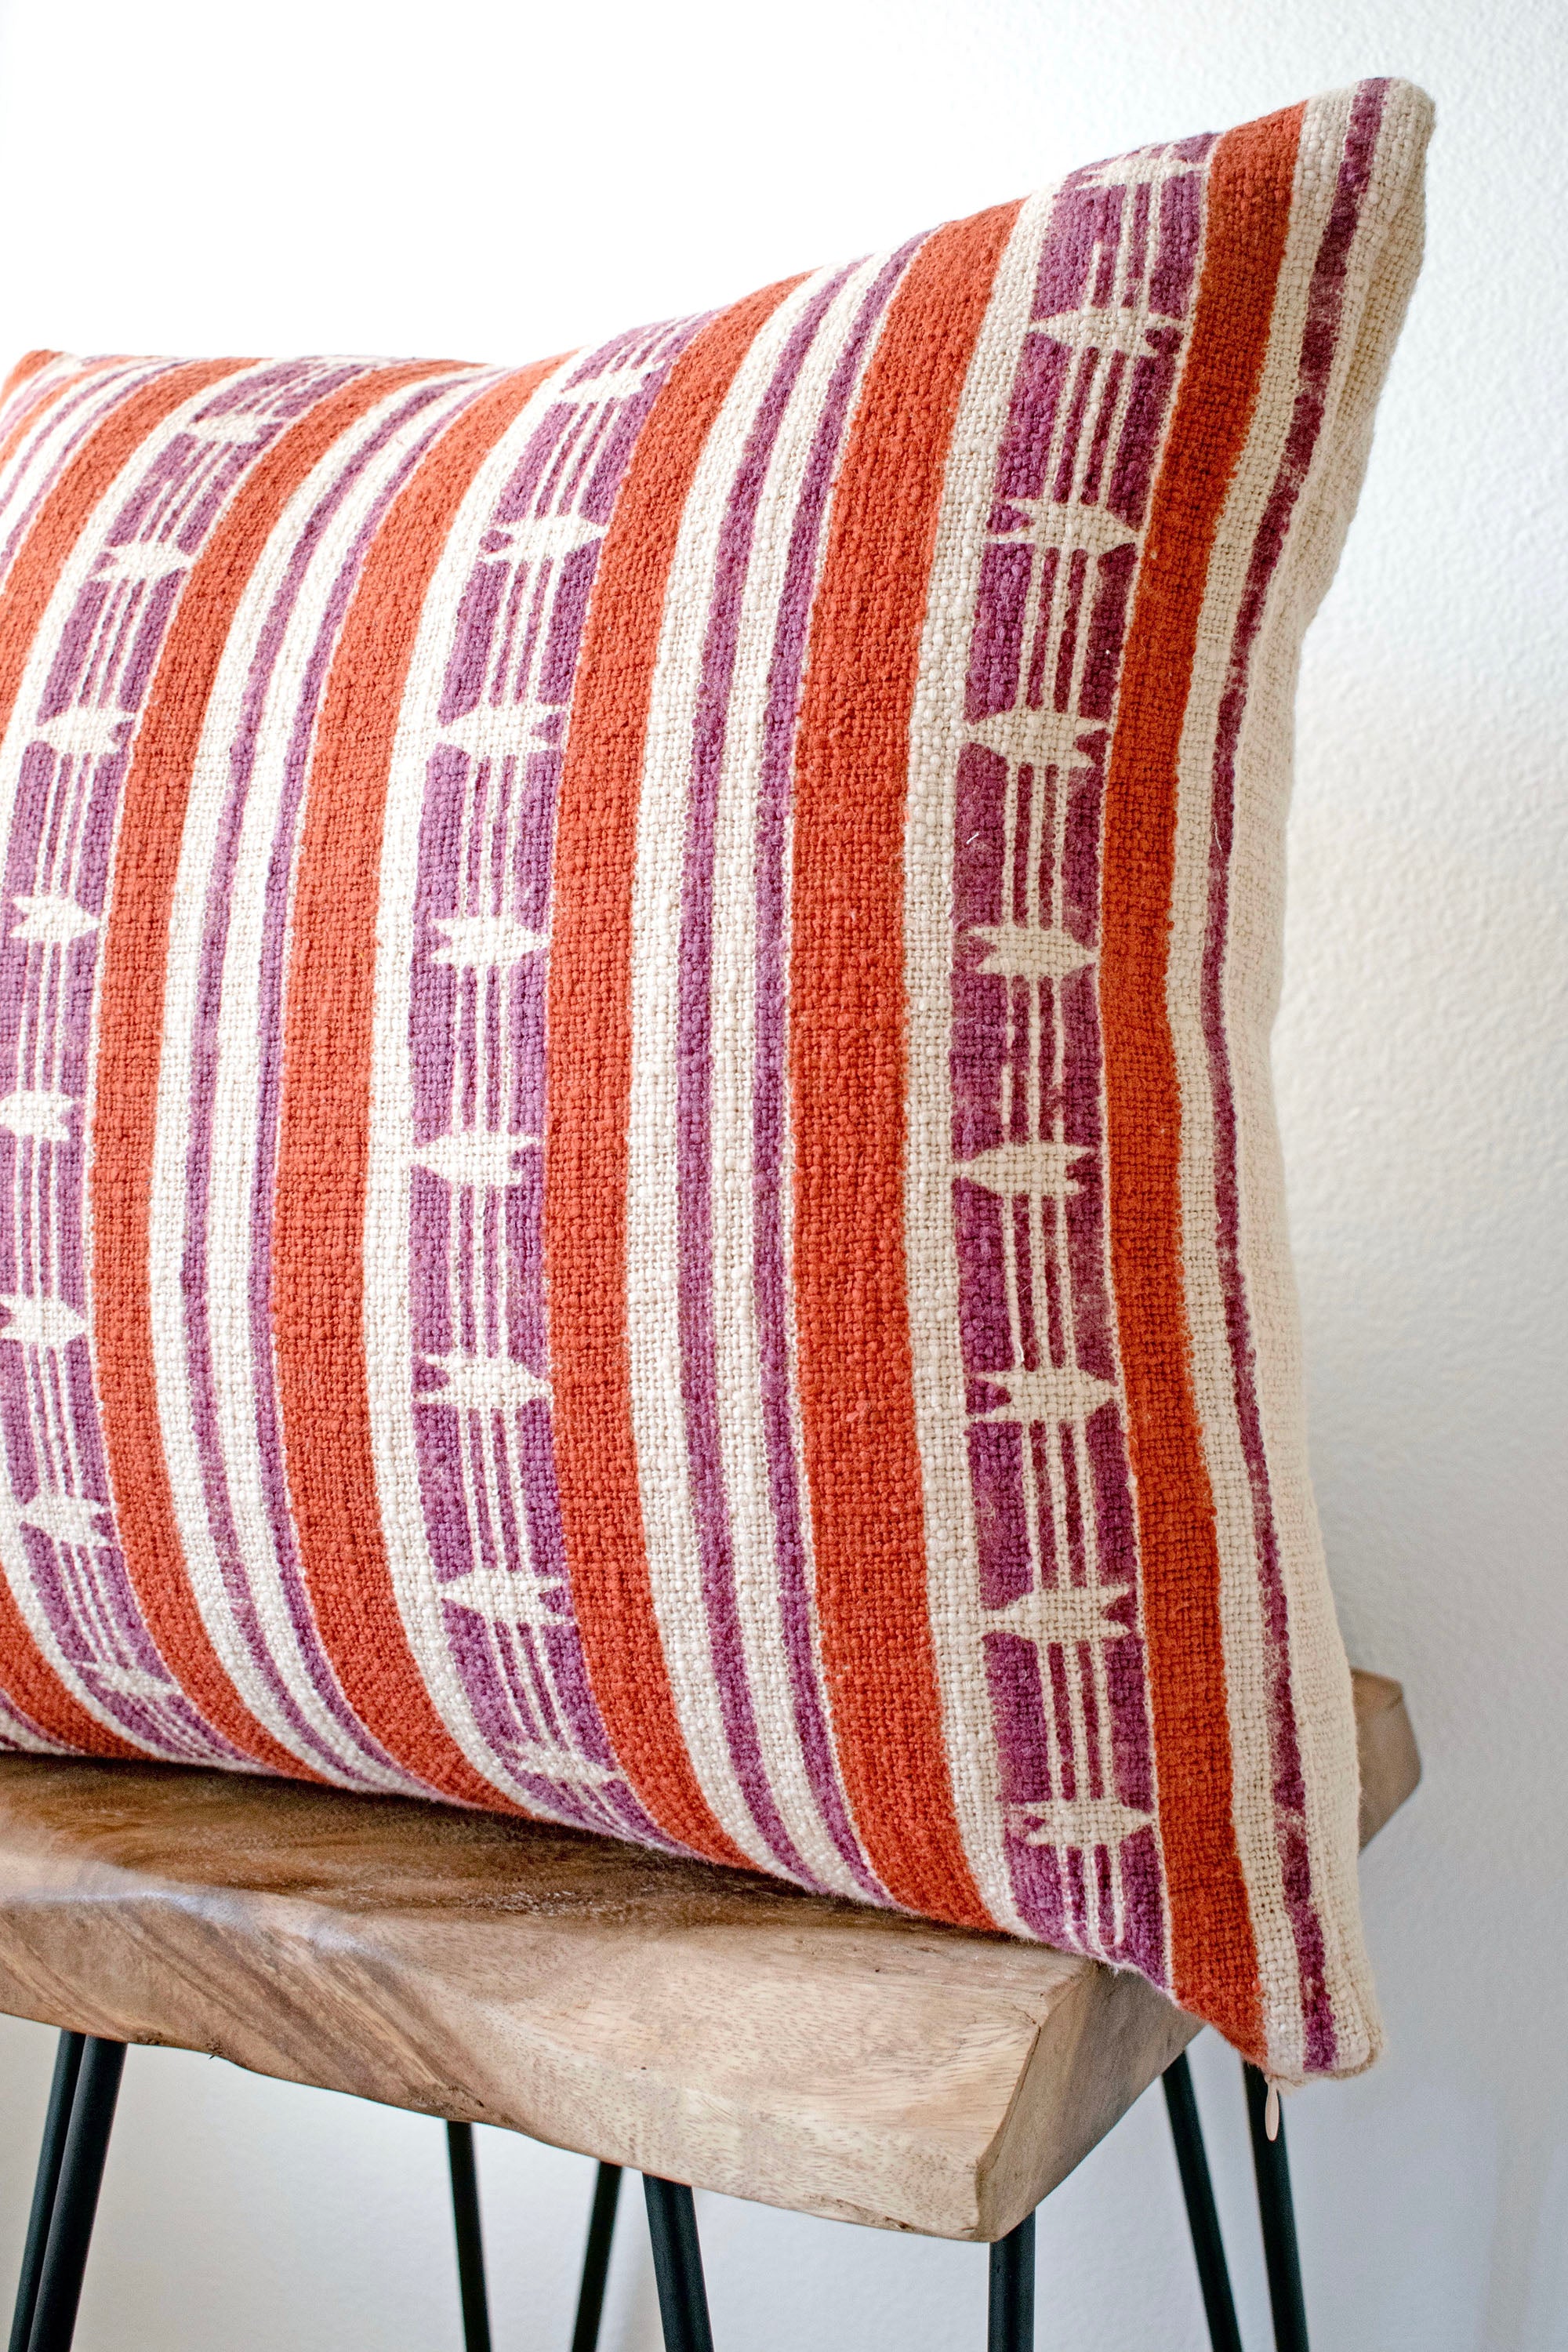 Mojave block print pillow on a stool against white, angled